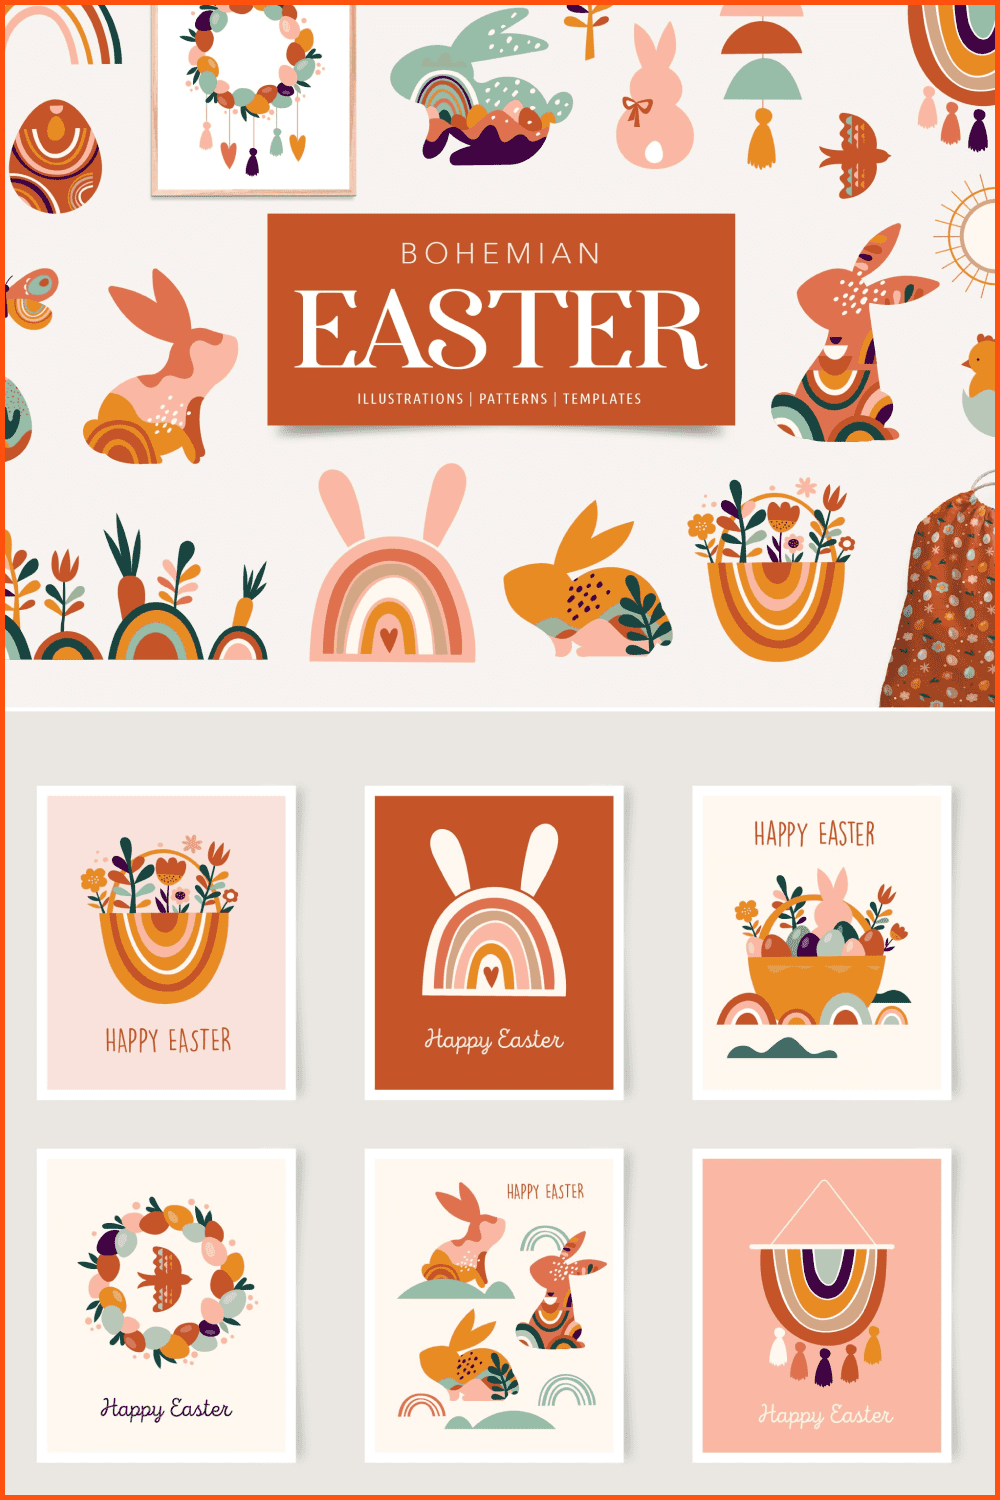 Bohemian Easter collection.